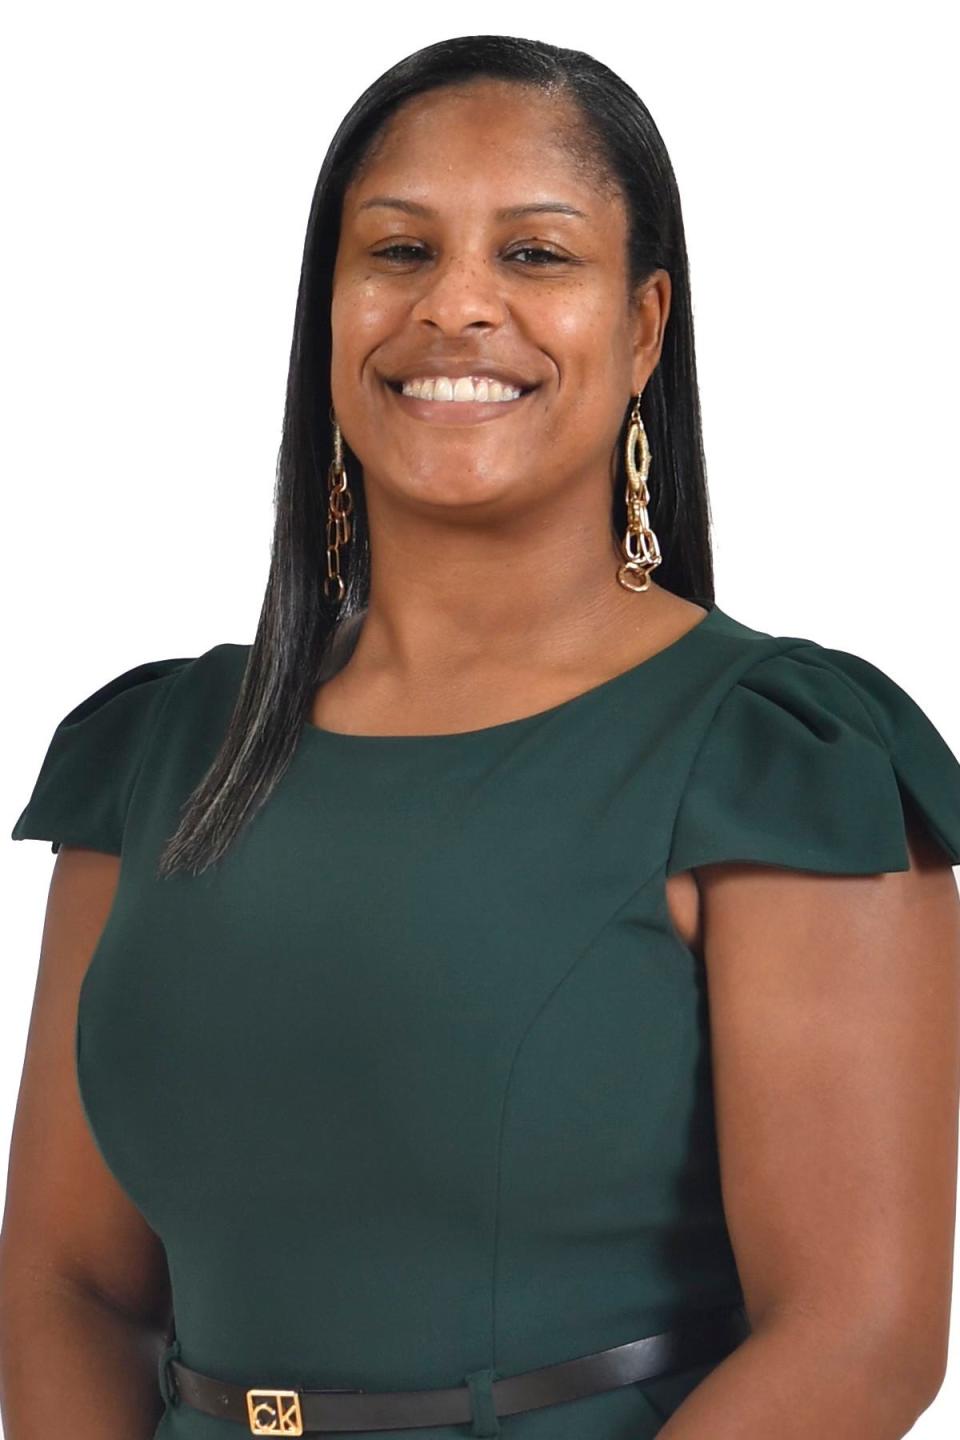 UNCW named Nicole Woods its 12th women's head basketball coach on Thursday, April 13, 2023.